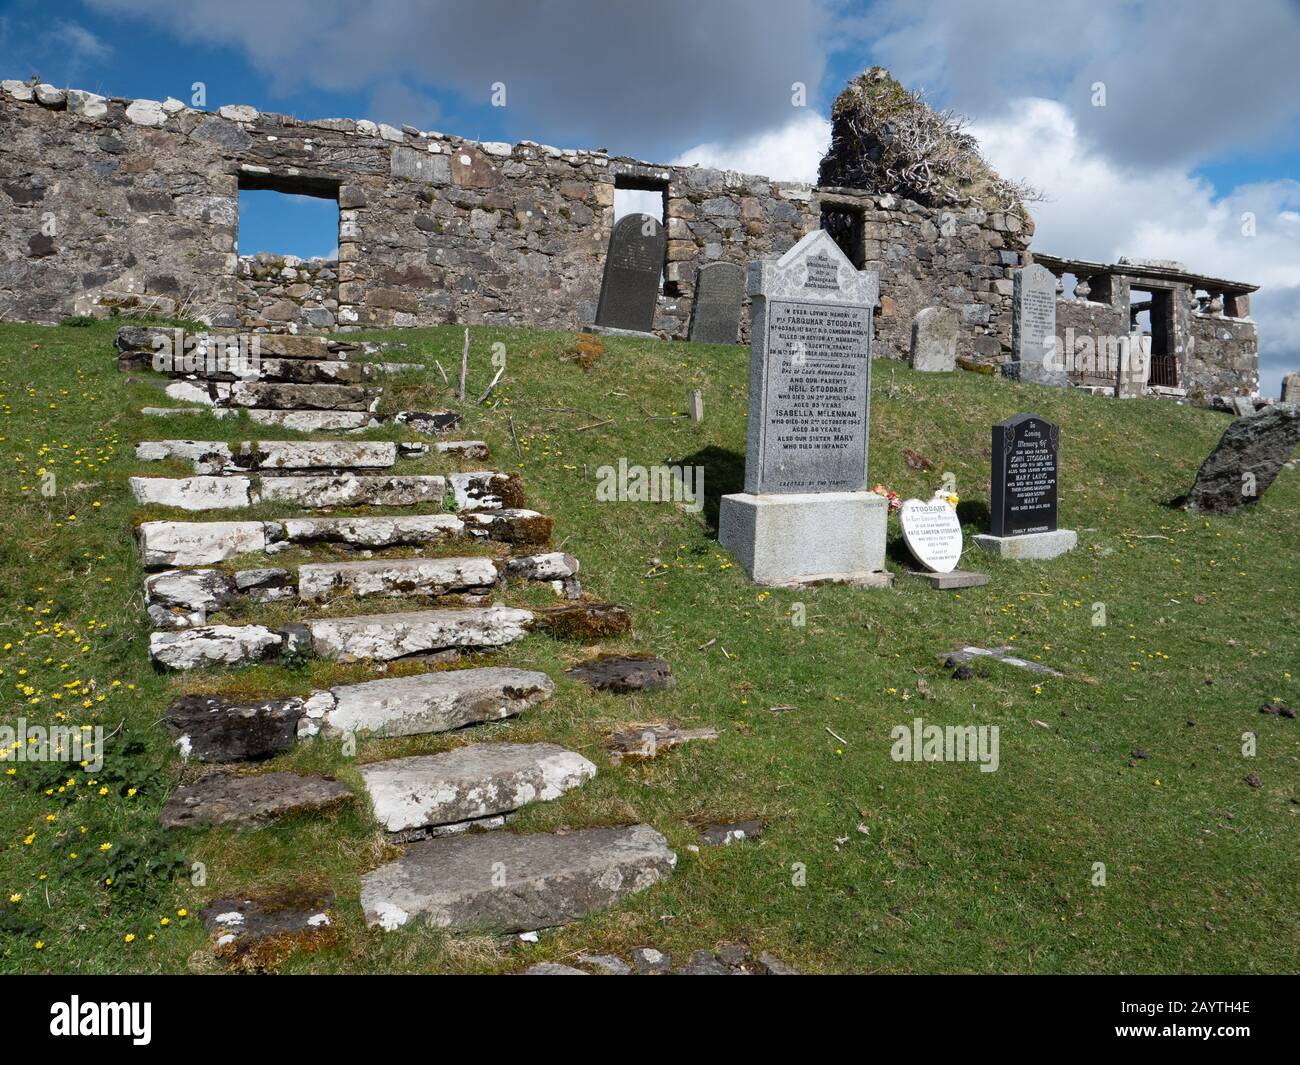 The ruins of the former parish church Cill Chriosd or Kilchrist on The Isle of Skye, Scotland, UK. Stock Photo